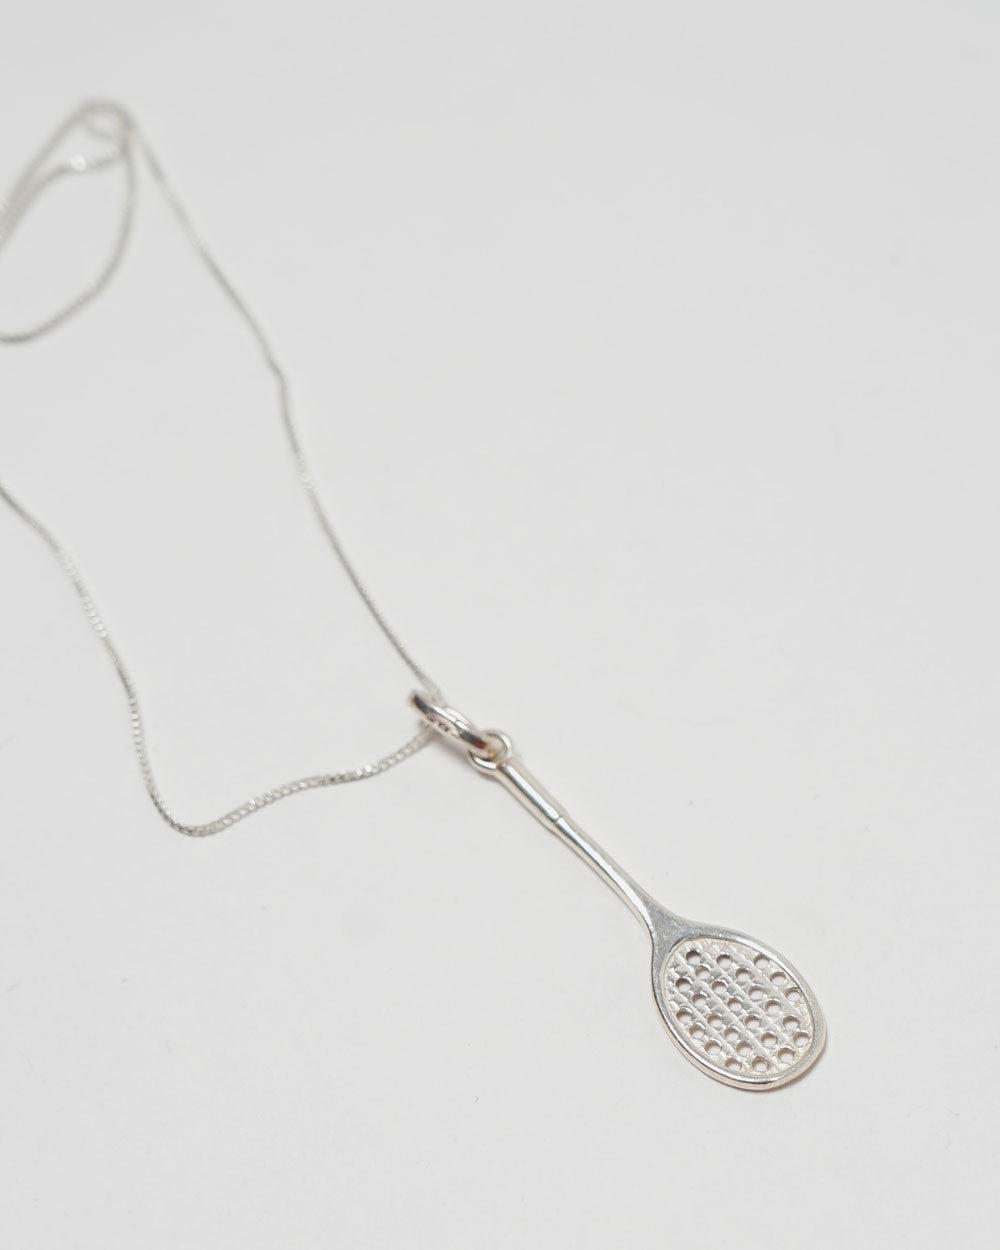 Silver Necklace w/ Racket Charm